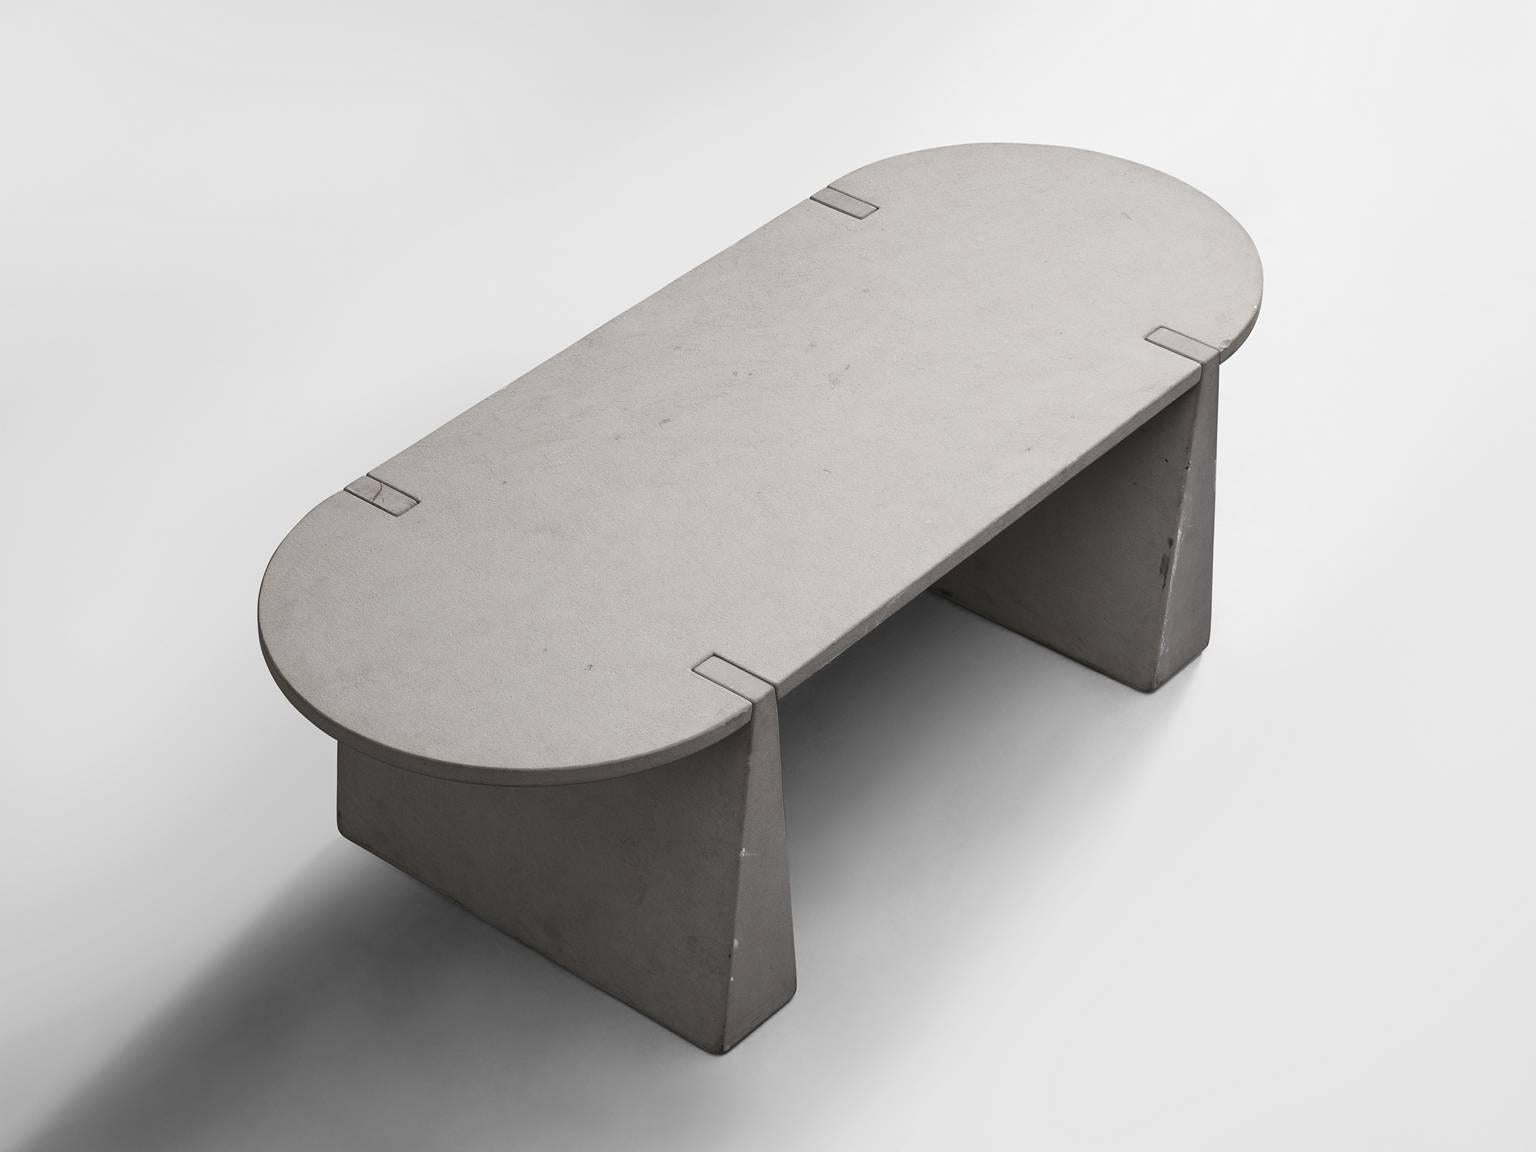 Large dining table in concrete by Angelo Mangiarotti, Italy 1970s.

This sculptural table by Angelo Mangiarotti is a skilful example of postmodern design. The sturdy table shows a strong character due to its simplicity, as to be seen more often in